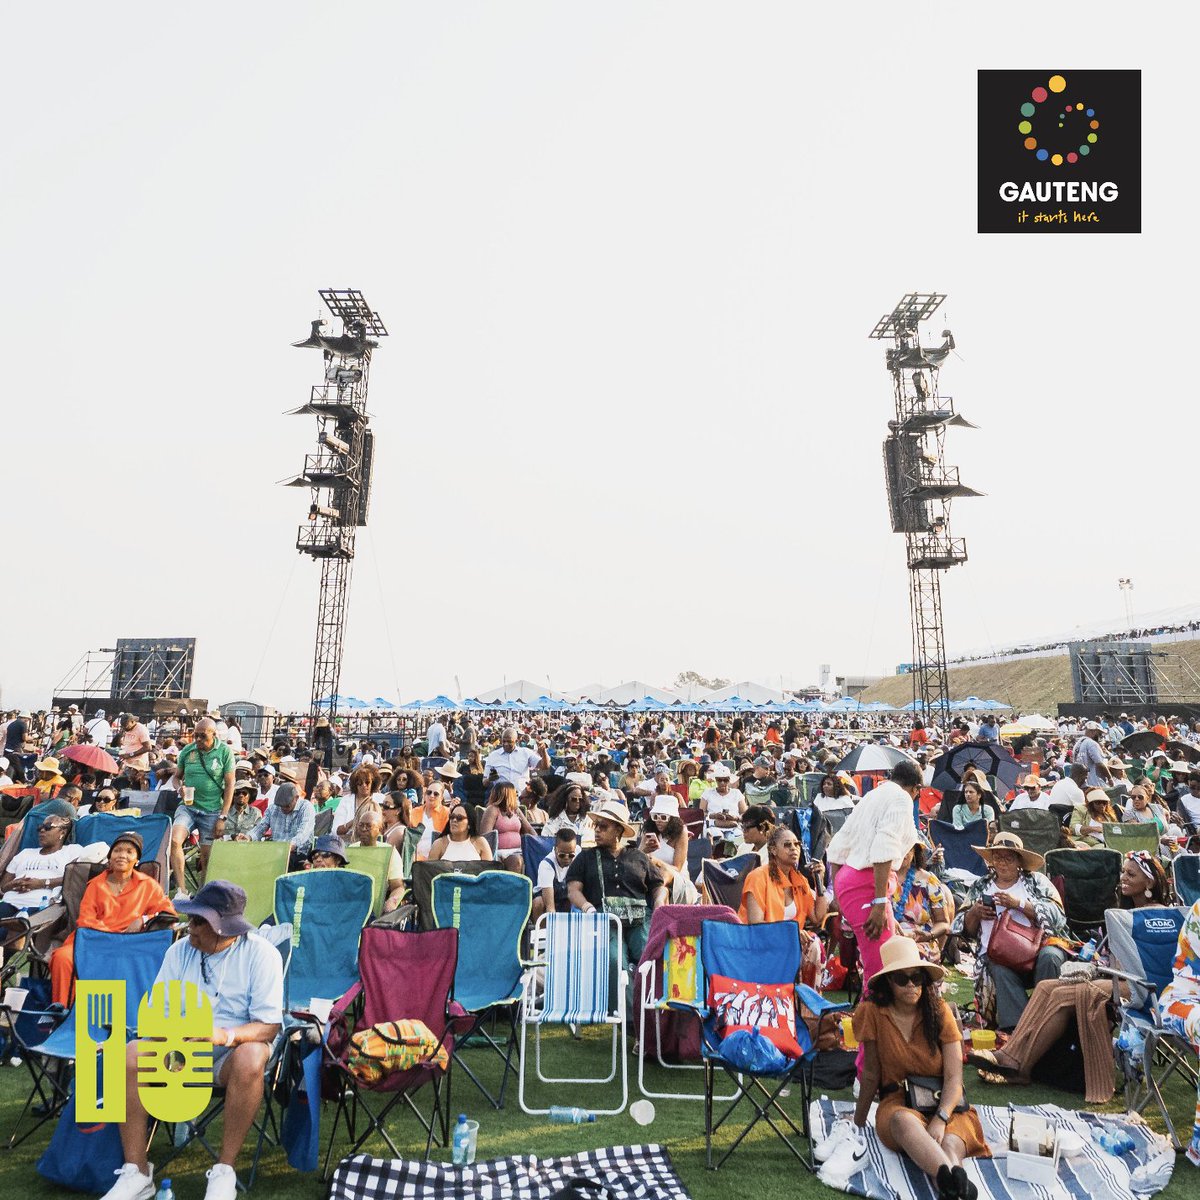 #DStvDeliciousFestival allows people to experience the magic of Gauteng! From delectable dishes to infectious music and rich culture, it's a taste of all the incredible things that Gauteng has to offer. #SupportLocalFoodTraders #GPLifestyle #VisitGauteng #Welcome2joburg